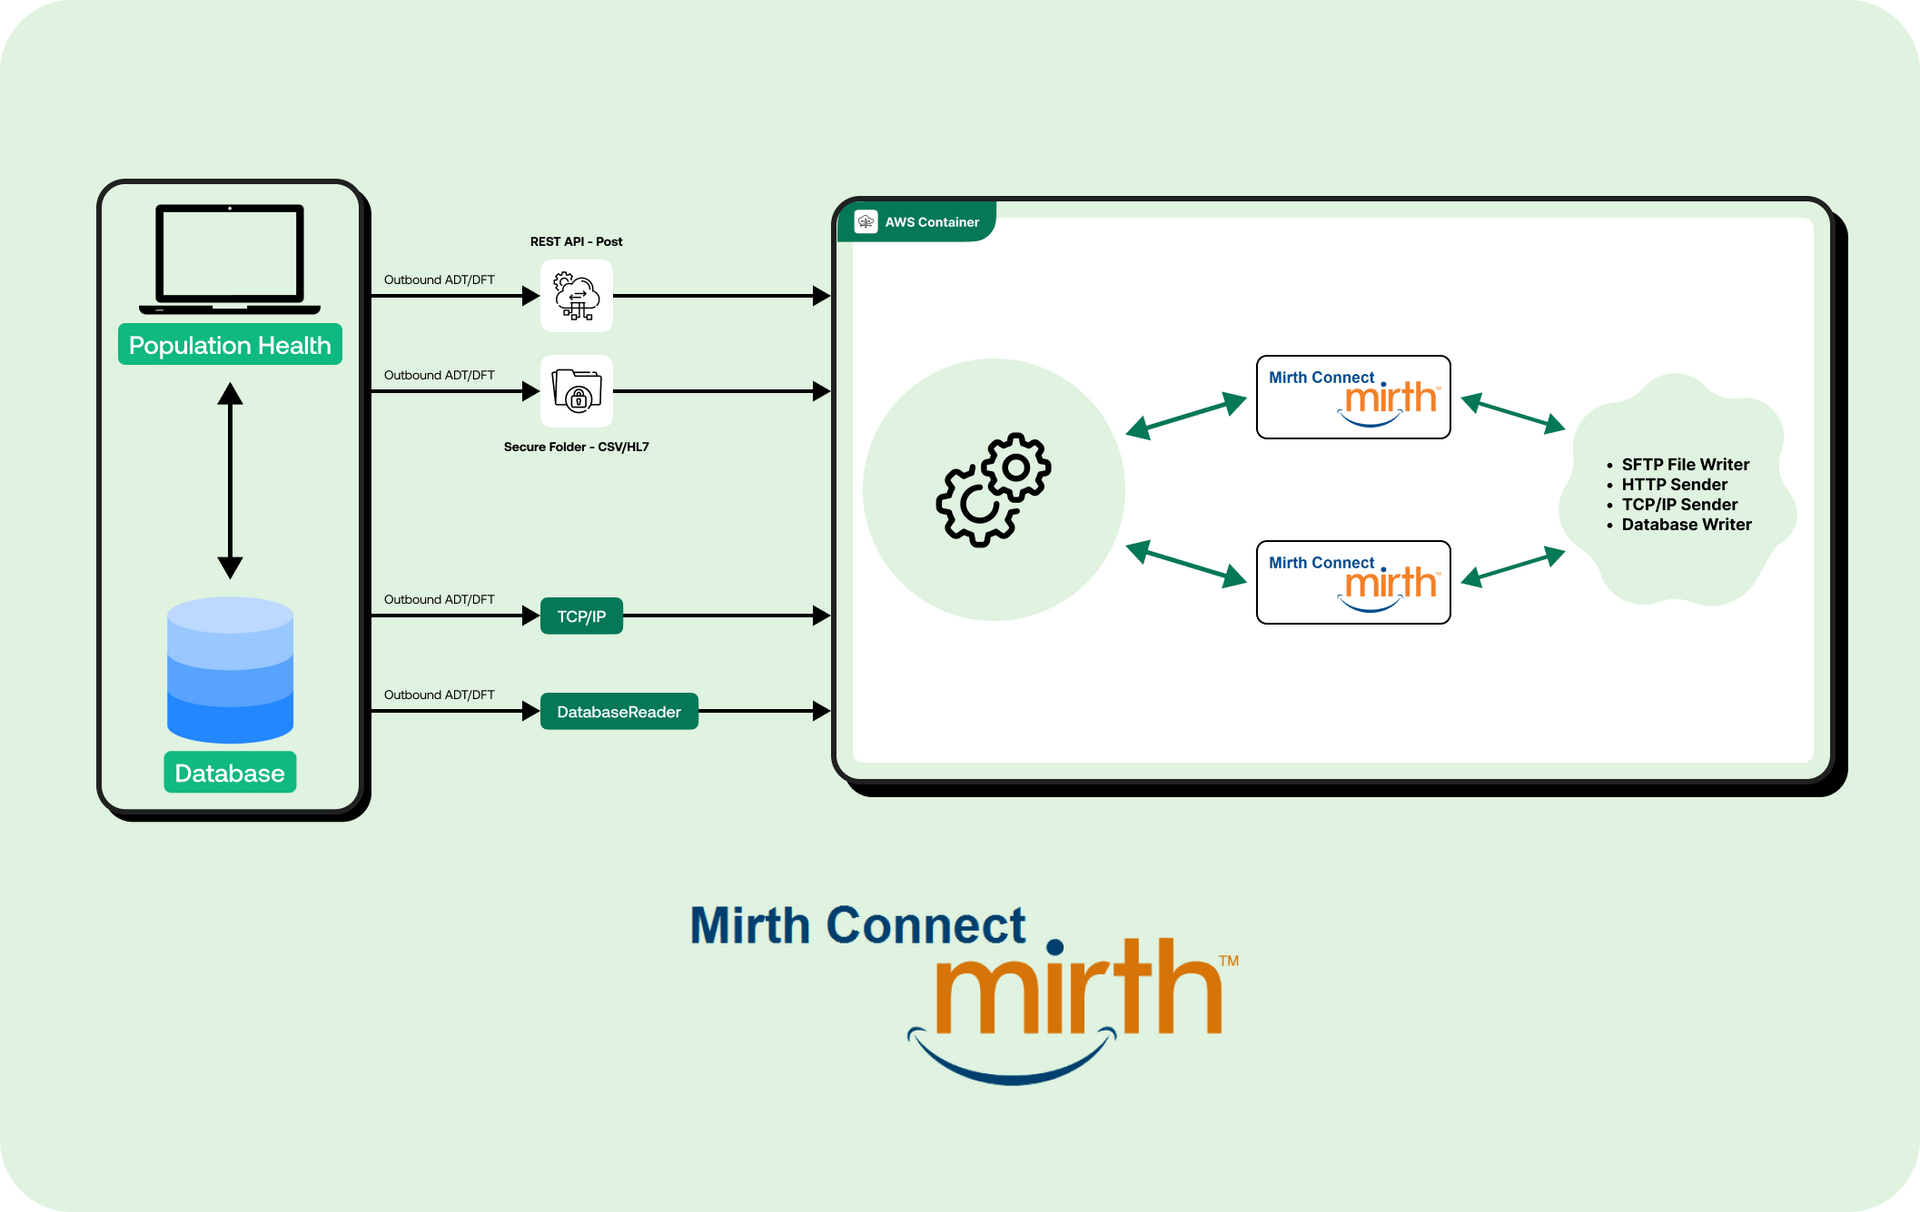 Mirth consulting service by Taliun | Mirth Connect On AWS